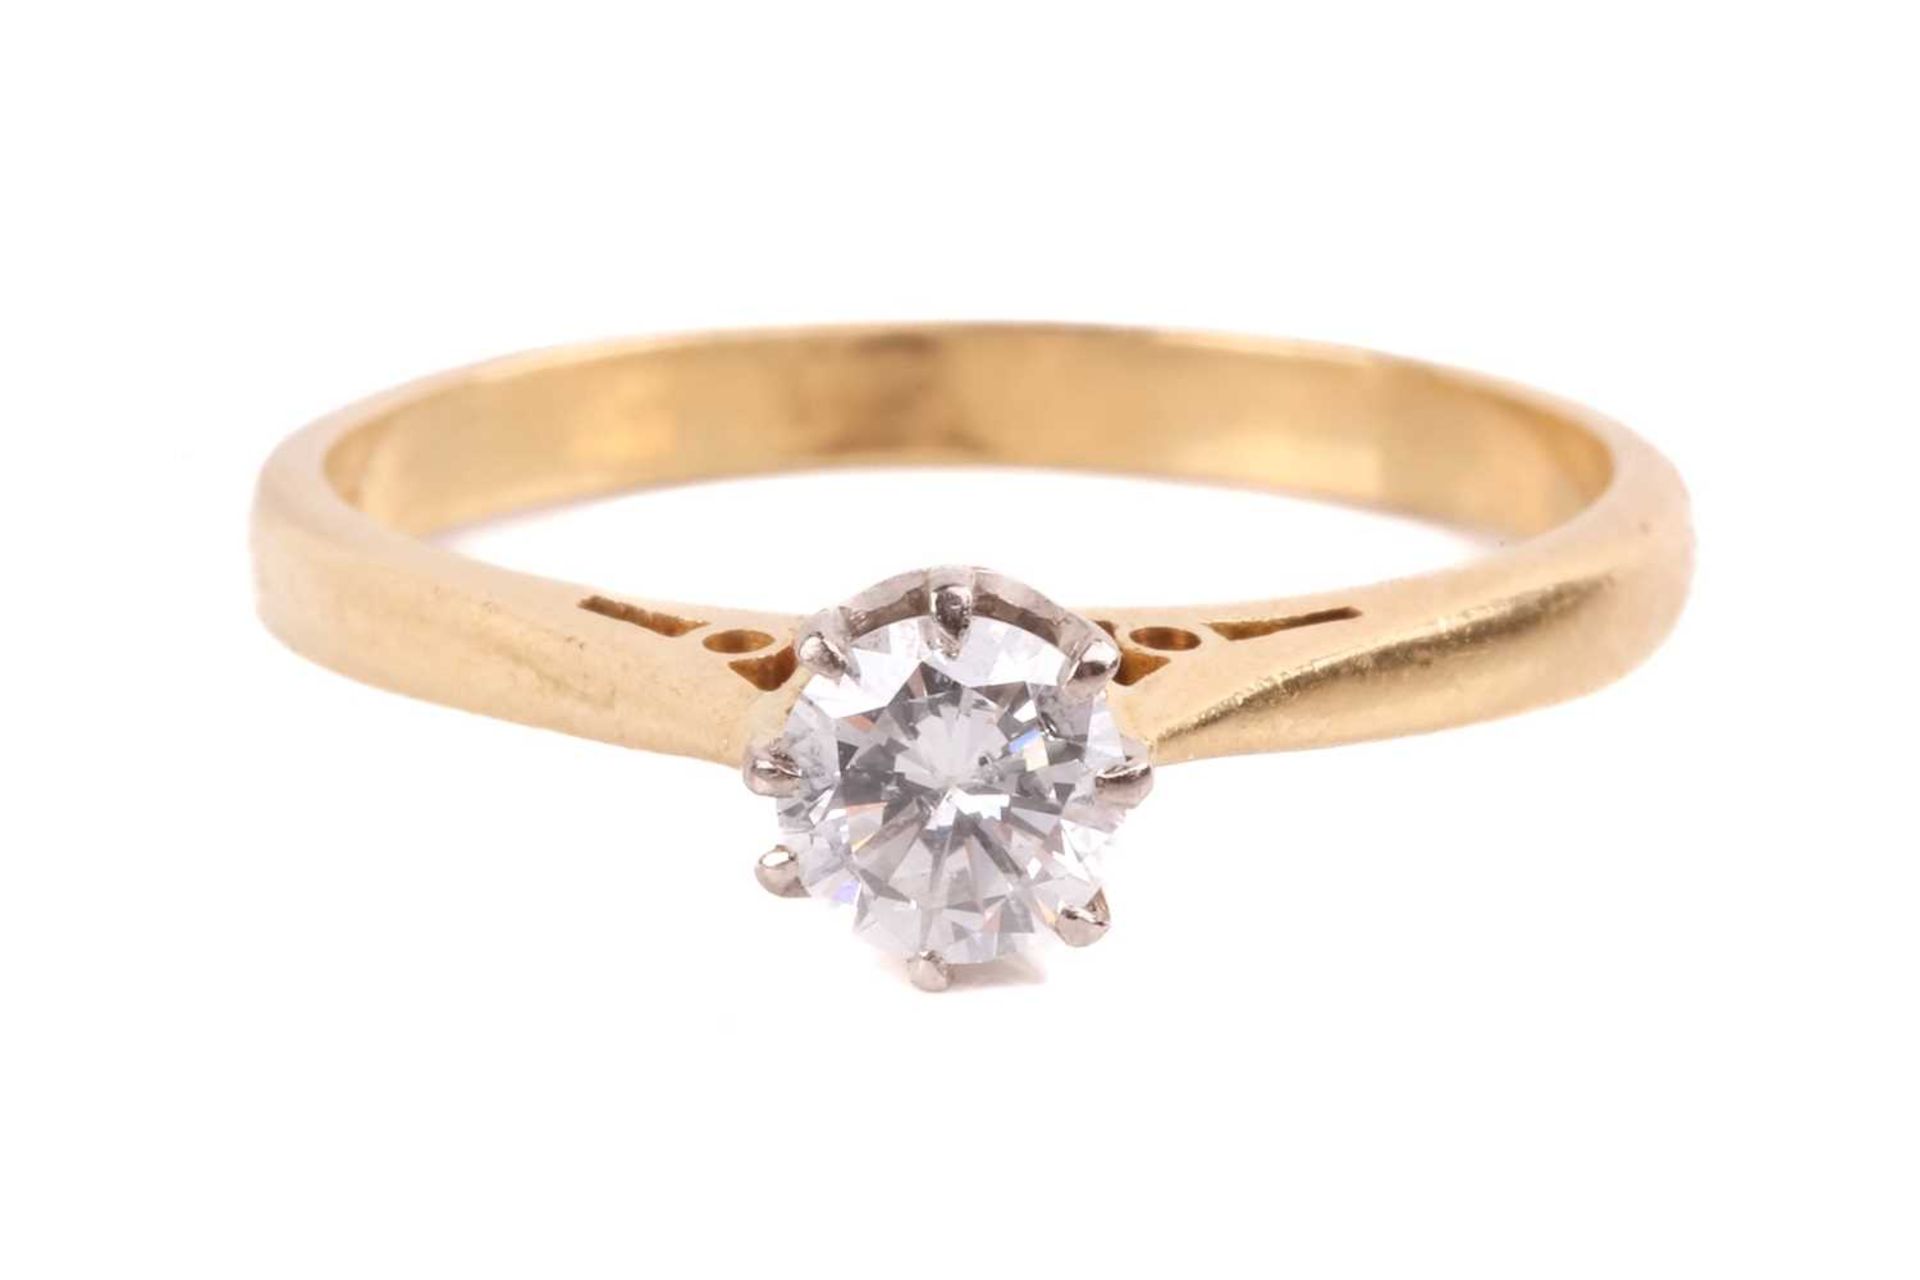 A diamond solitaire ring set with a round brilliant cut diamond with an estimated weight of 0.35ct